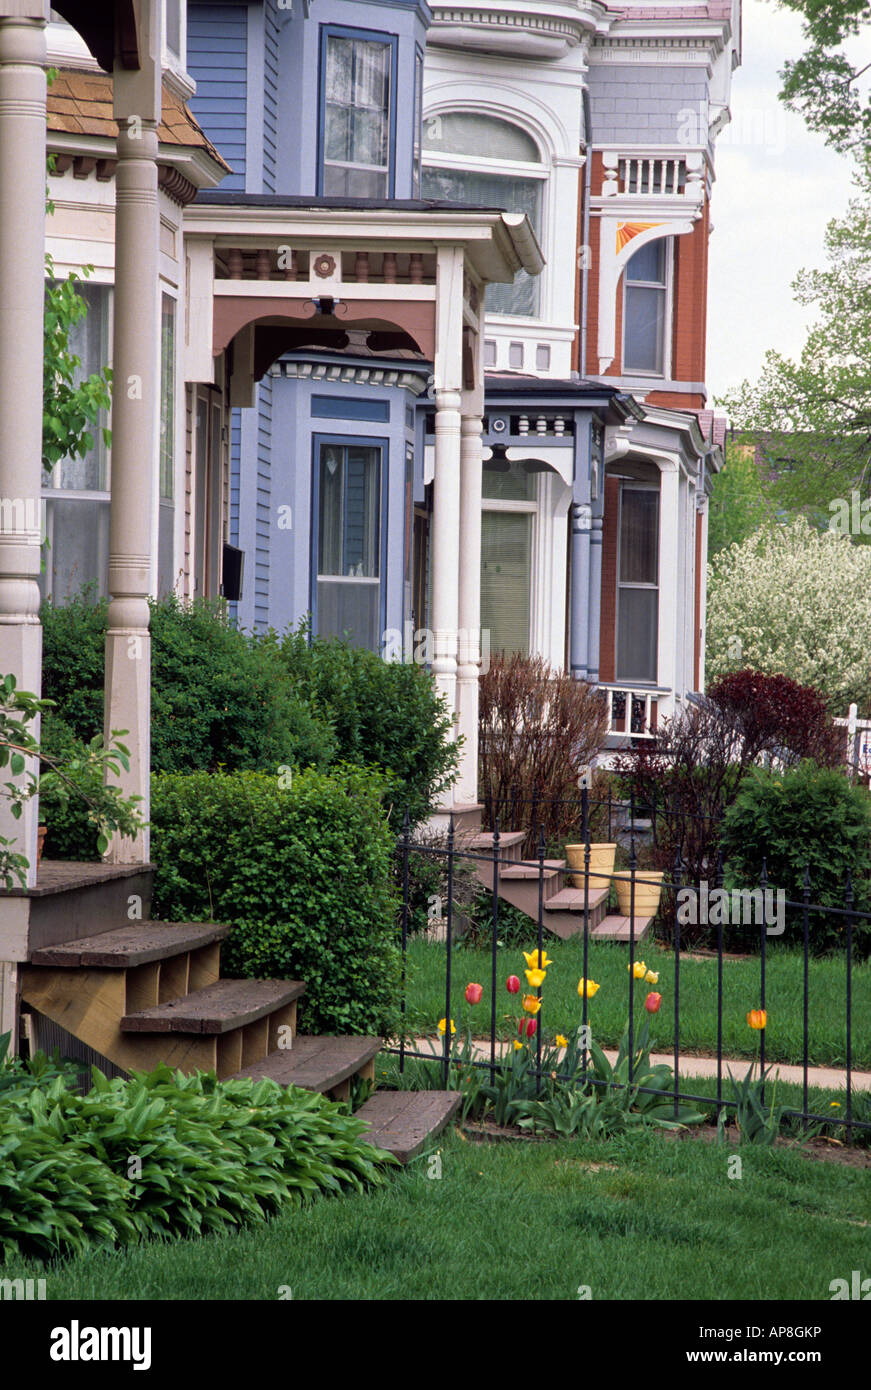 ROW OF RESTORED VICTORIAN HOMES IN THE CATHEDRAL HILL NEIGHBORHOOD OF ST. PAUL, MINNESOTA. SPRING. Stock Photo